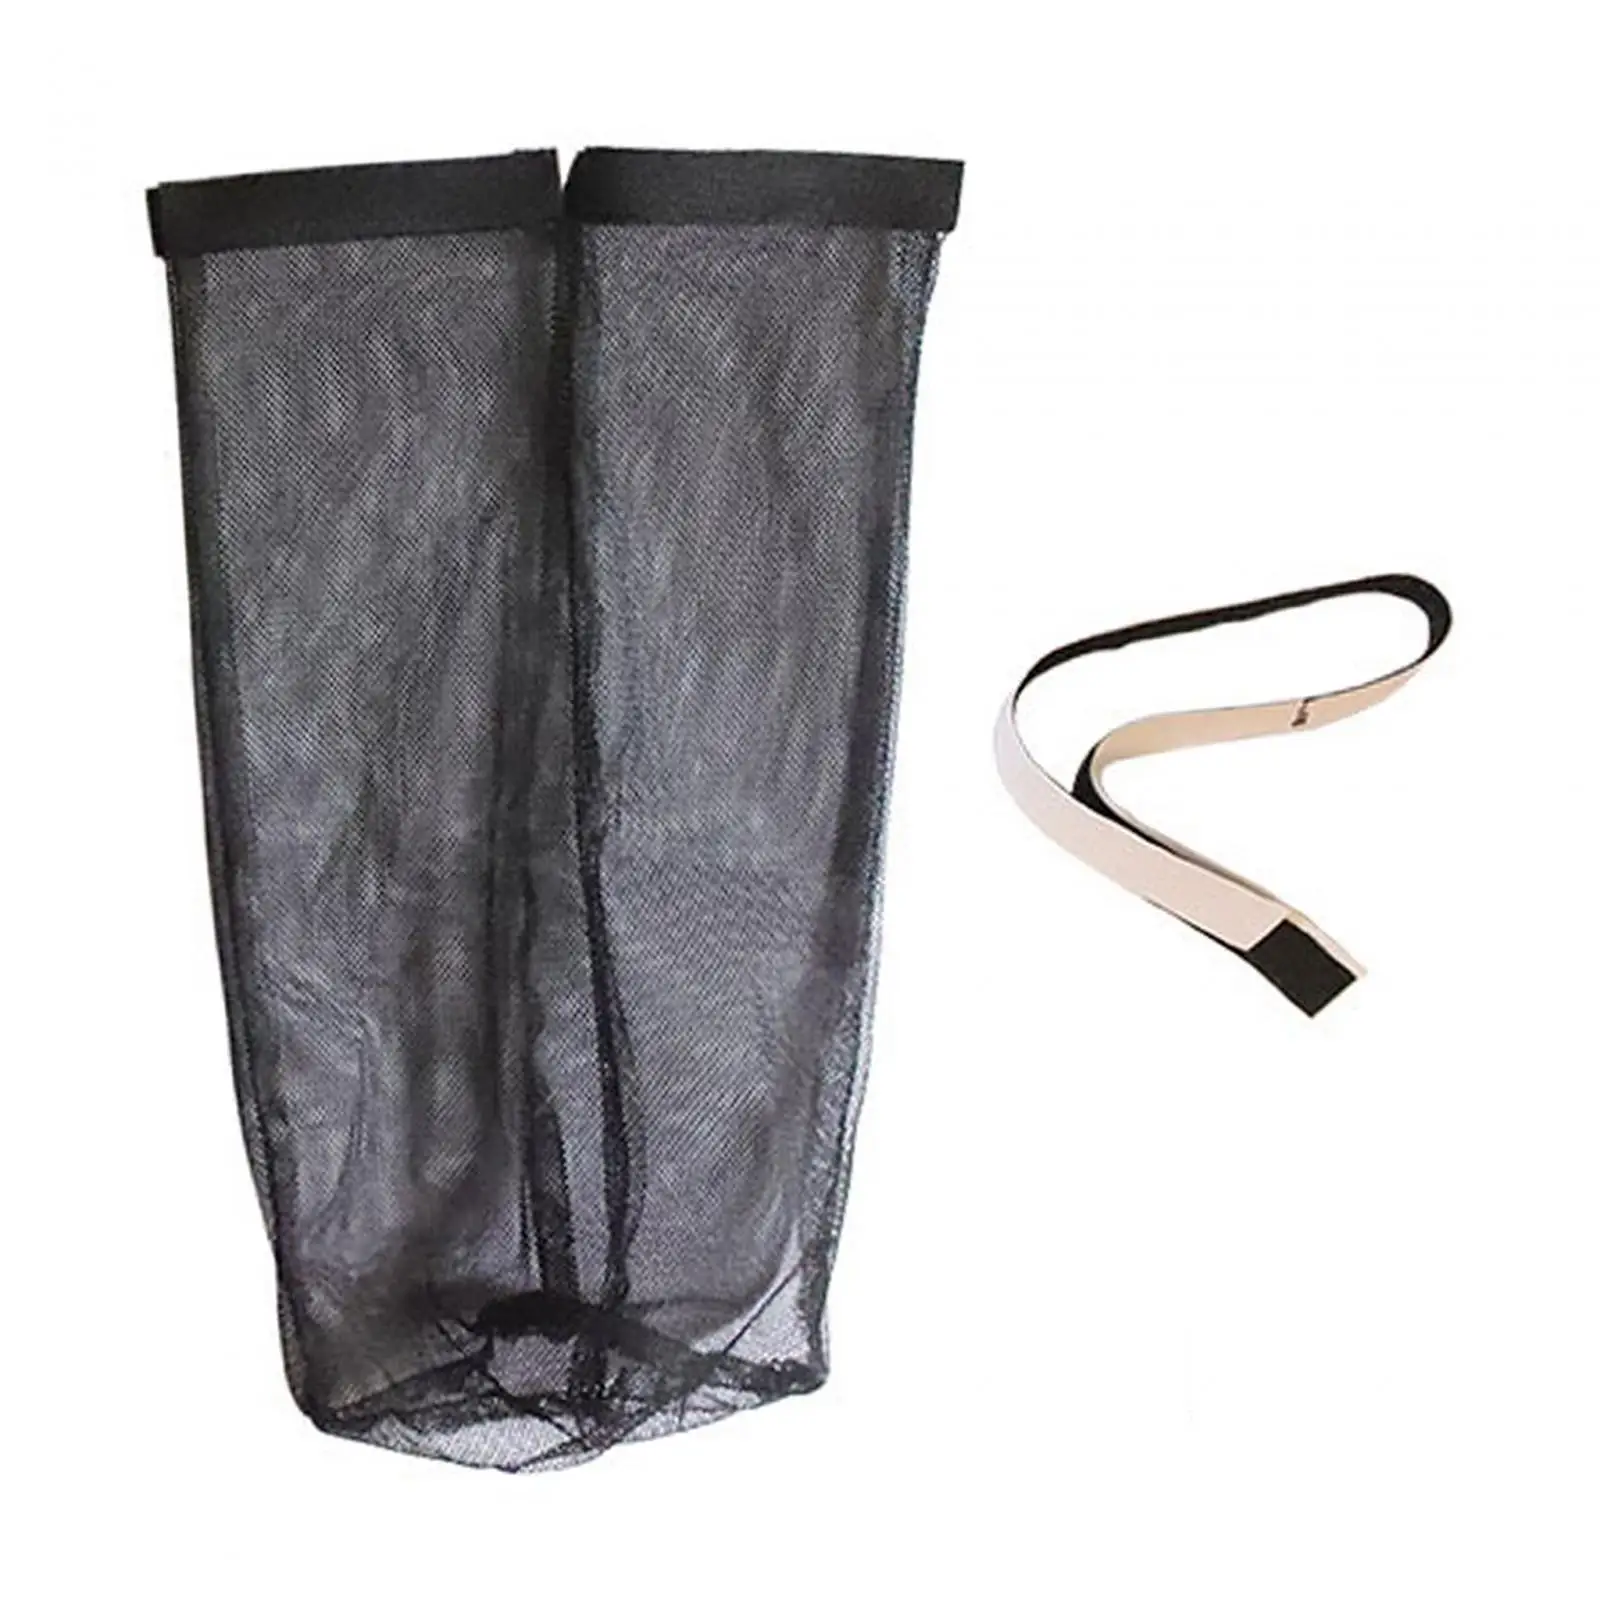 Dryer Lint Bag Catcher Durable Replacement Polyester Easy Installation 39x13cm for Outdoor Dryer Vent Black Lint Dust Filter Bag